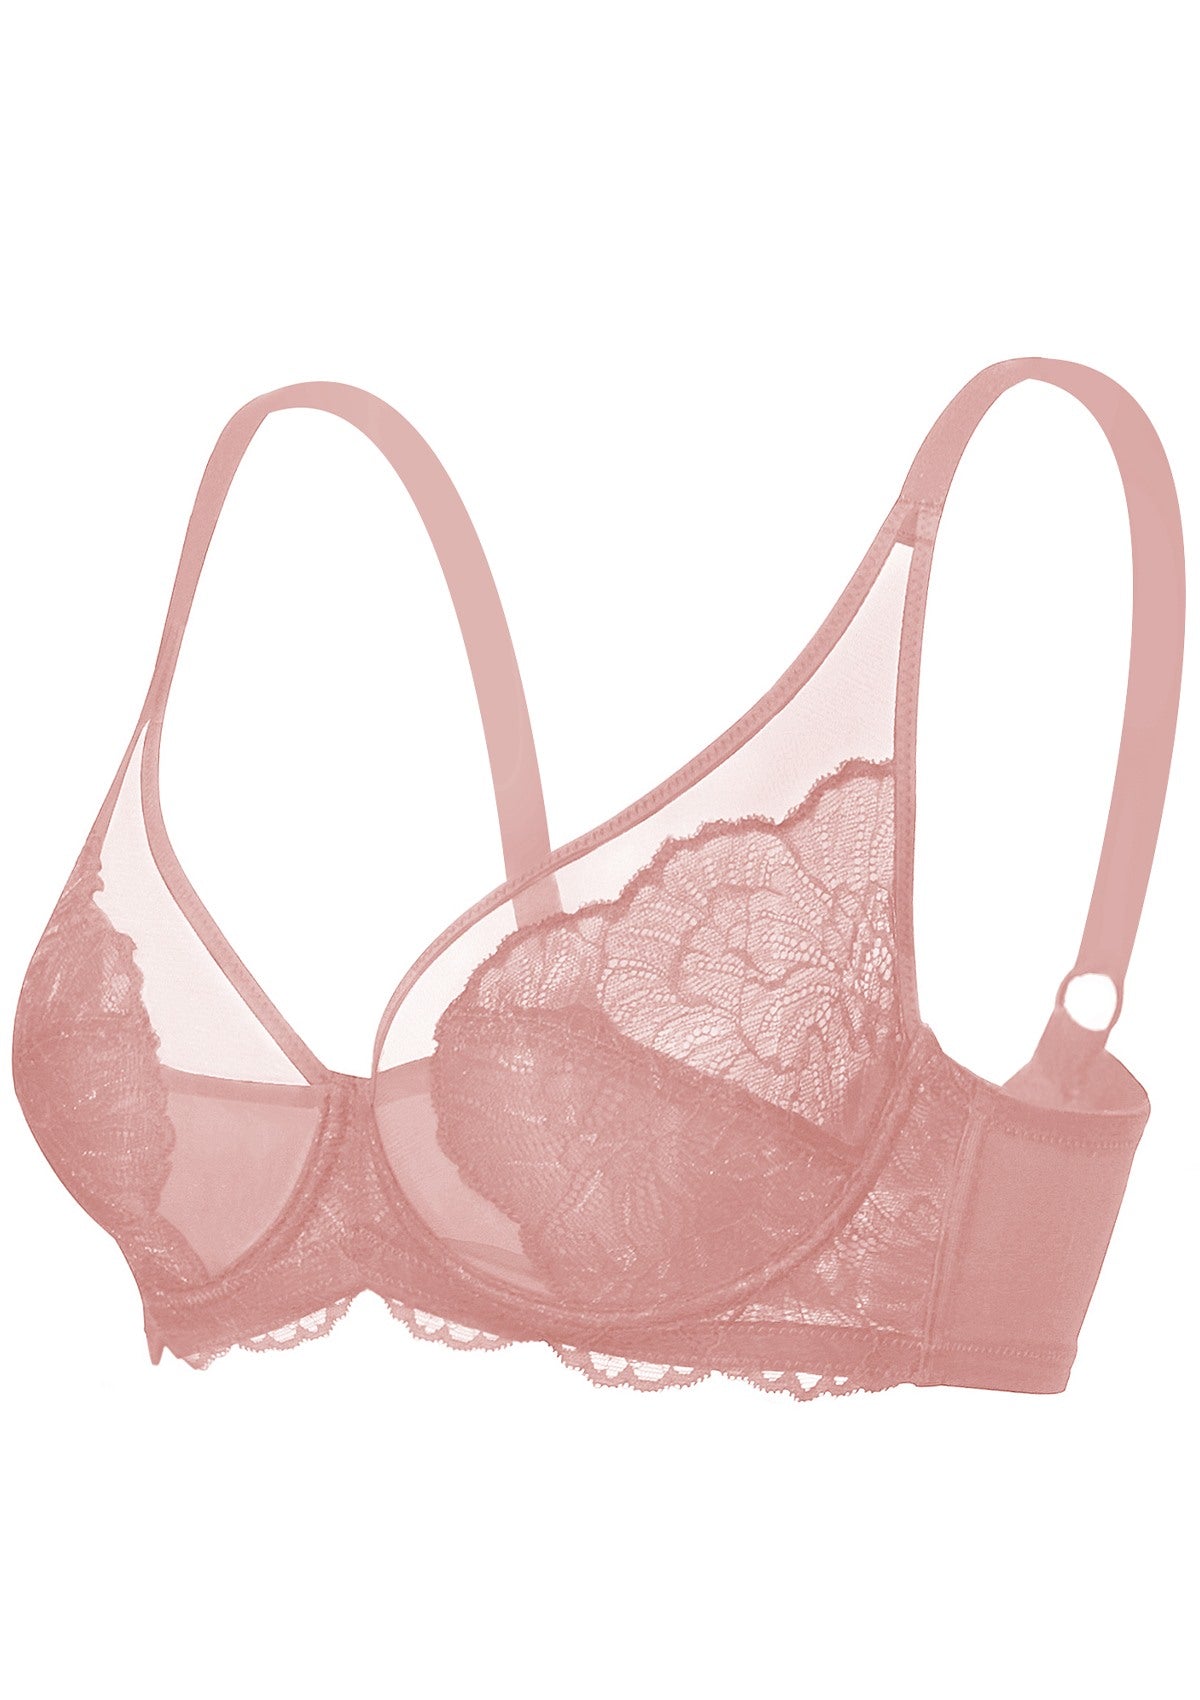 HSIA Blossom Unlined Lace Underwire Bra - Light Coral / 36 / D